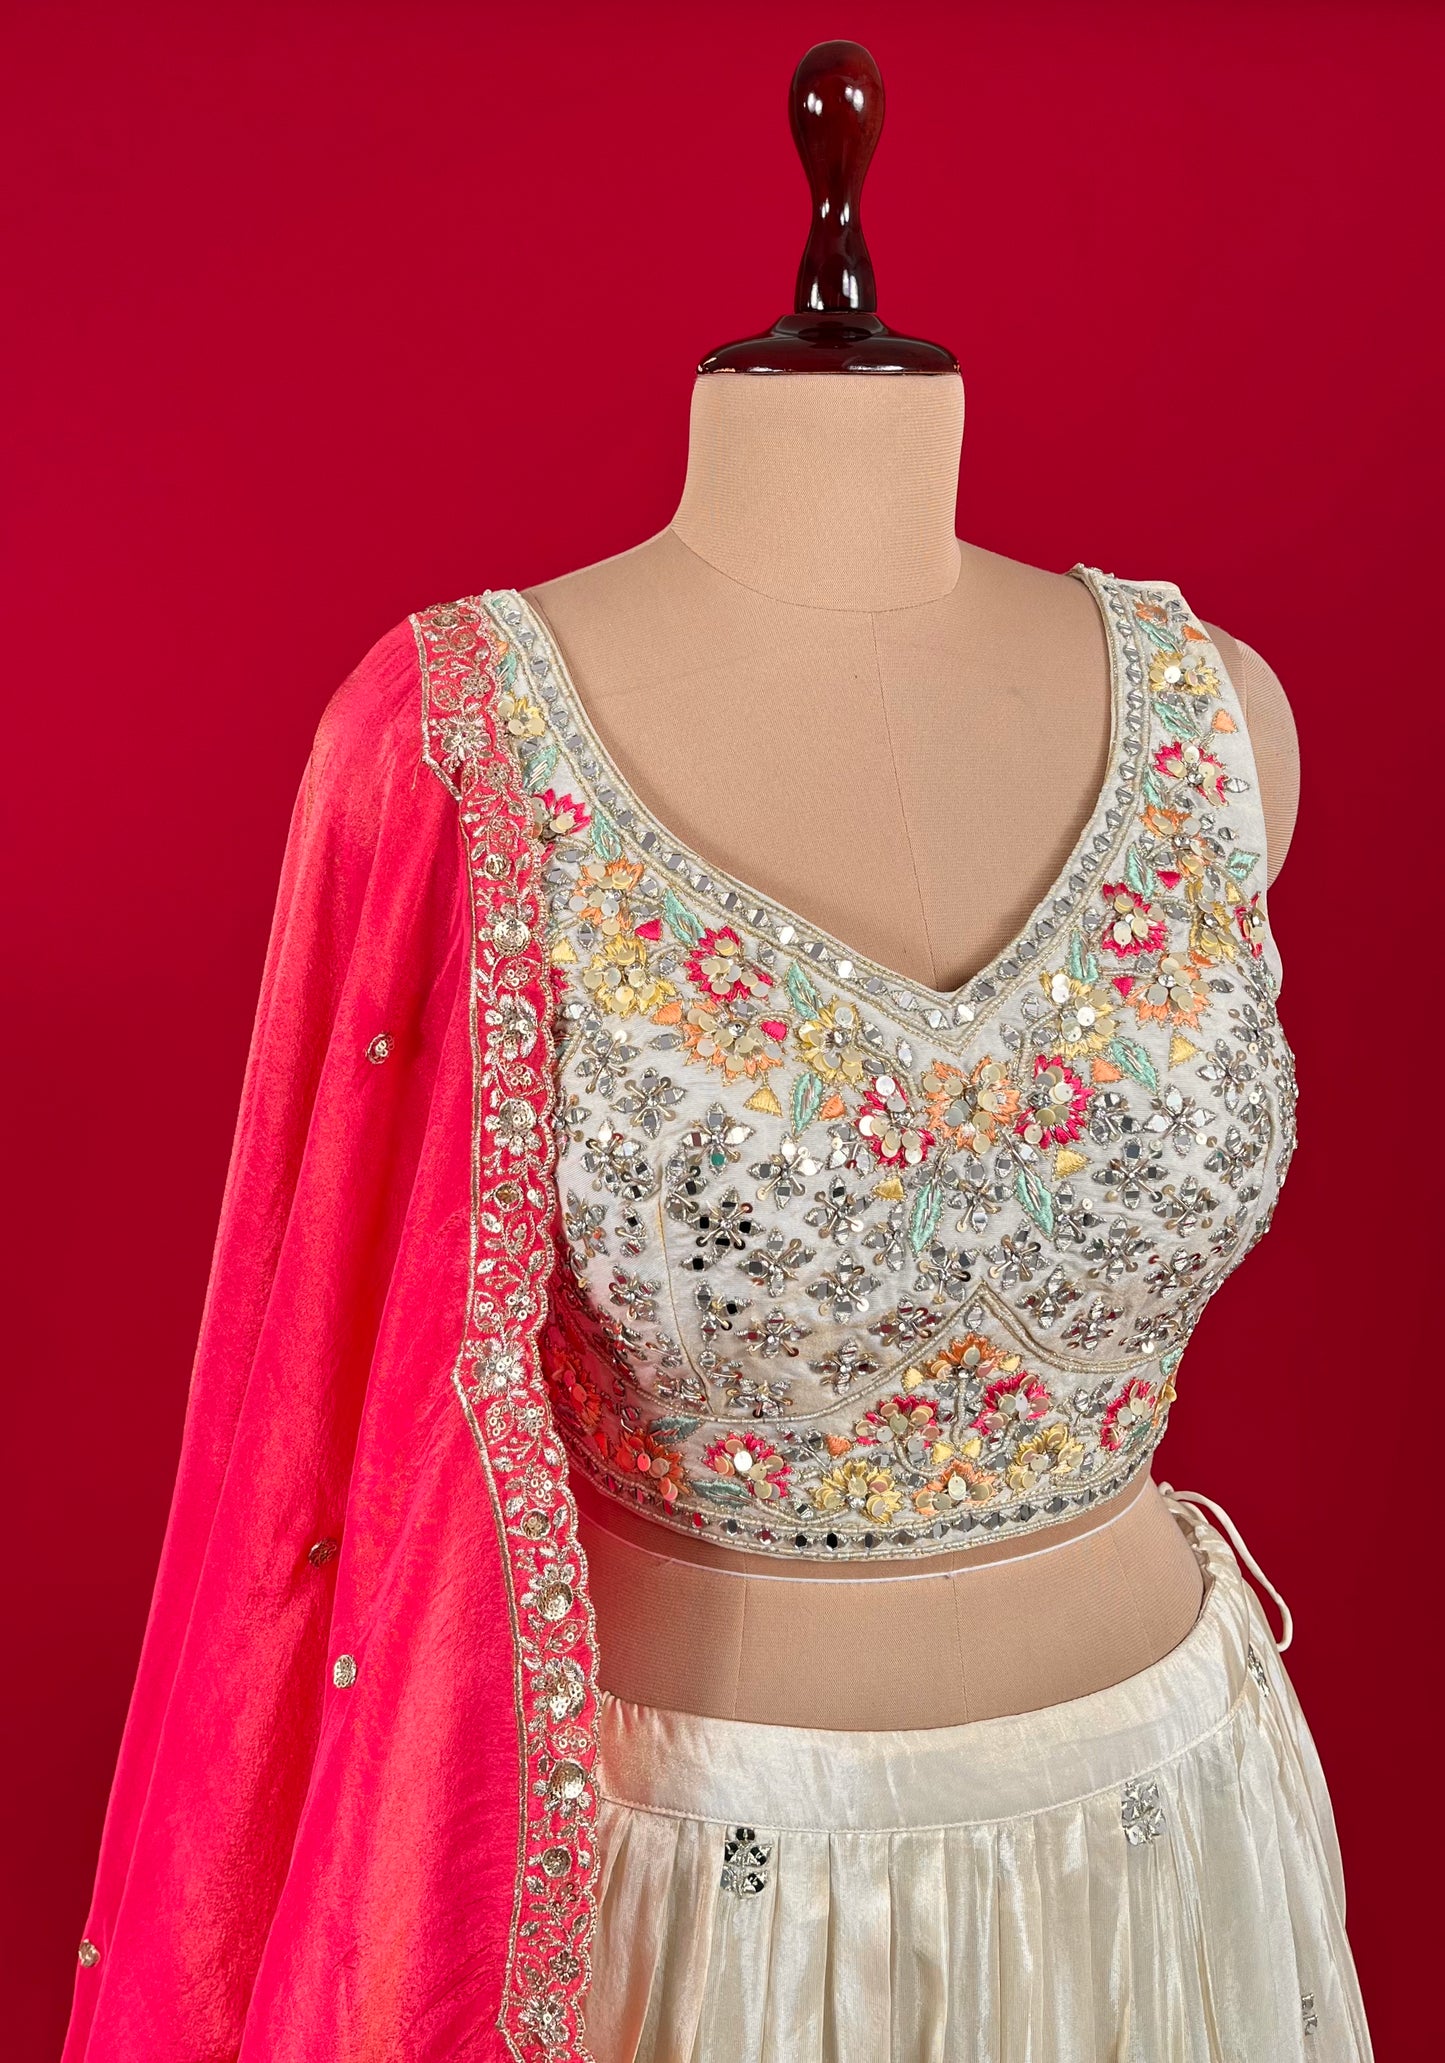 OFF WHITE COLOUR CREPE TISSUE LEHENGA WITH READYMADE BLOUSE & CONTRAST DUPATTA EMBELLISHED WITH MIRROR WORK